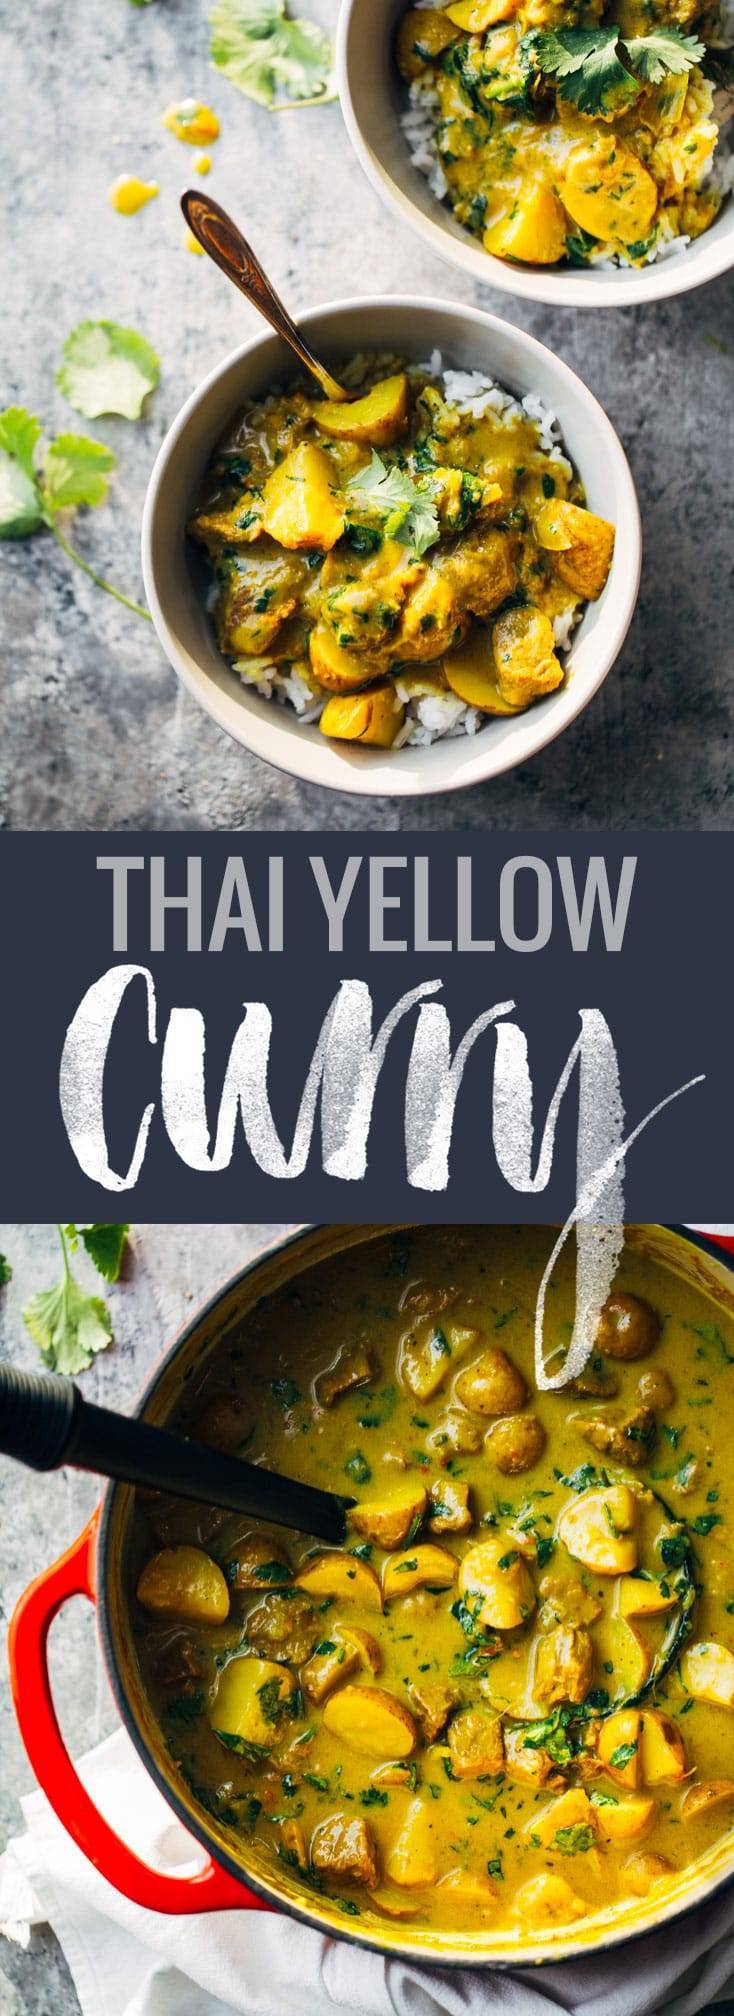 Thai Yellow Curry with Beef and Potatoes - made from scratch! so creamy and fragrant - perfect comfort food.